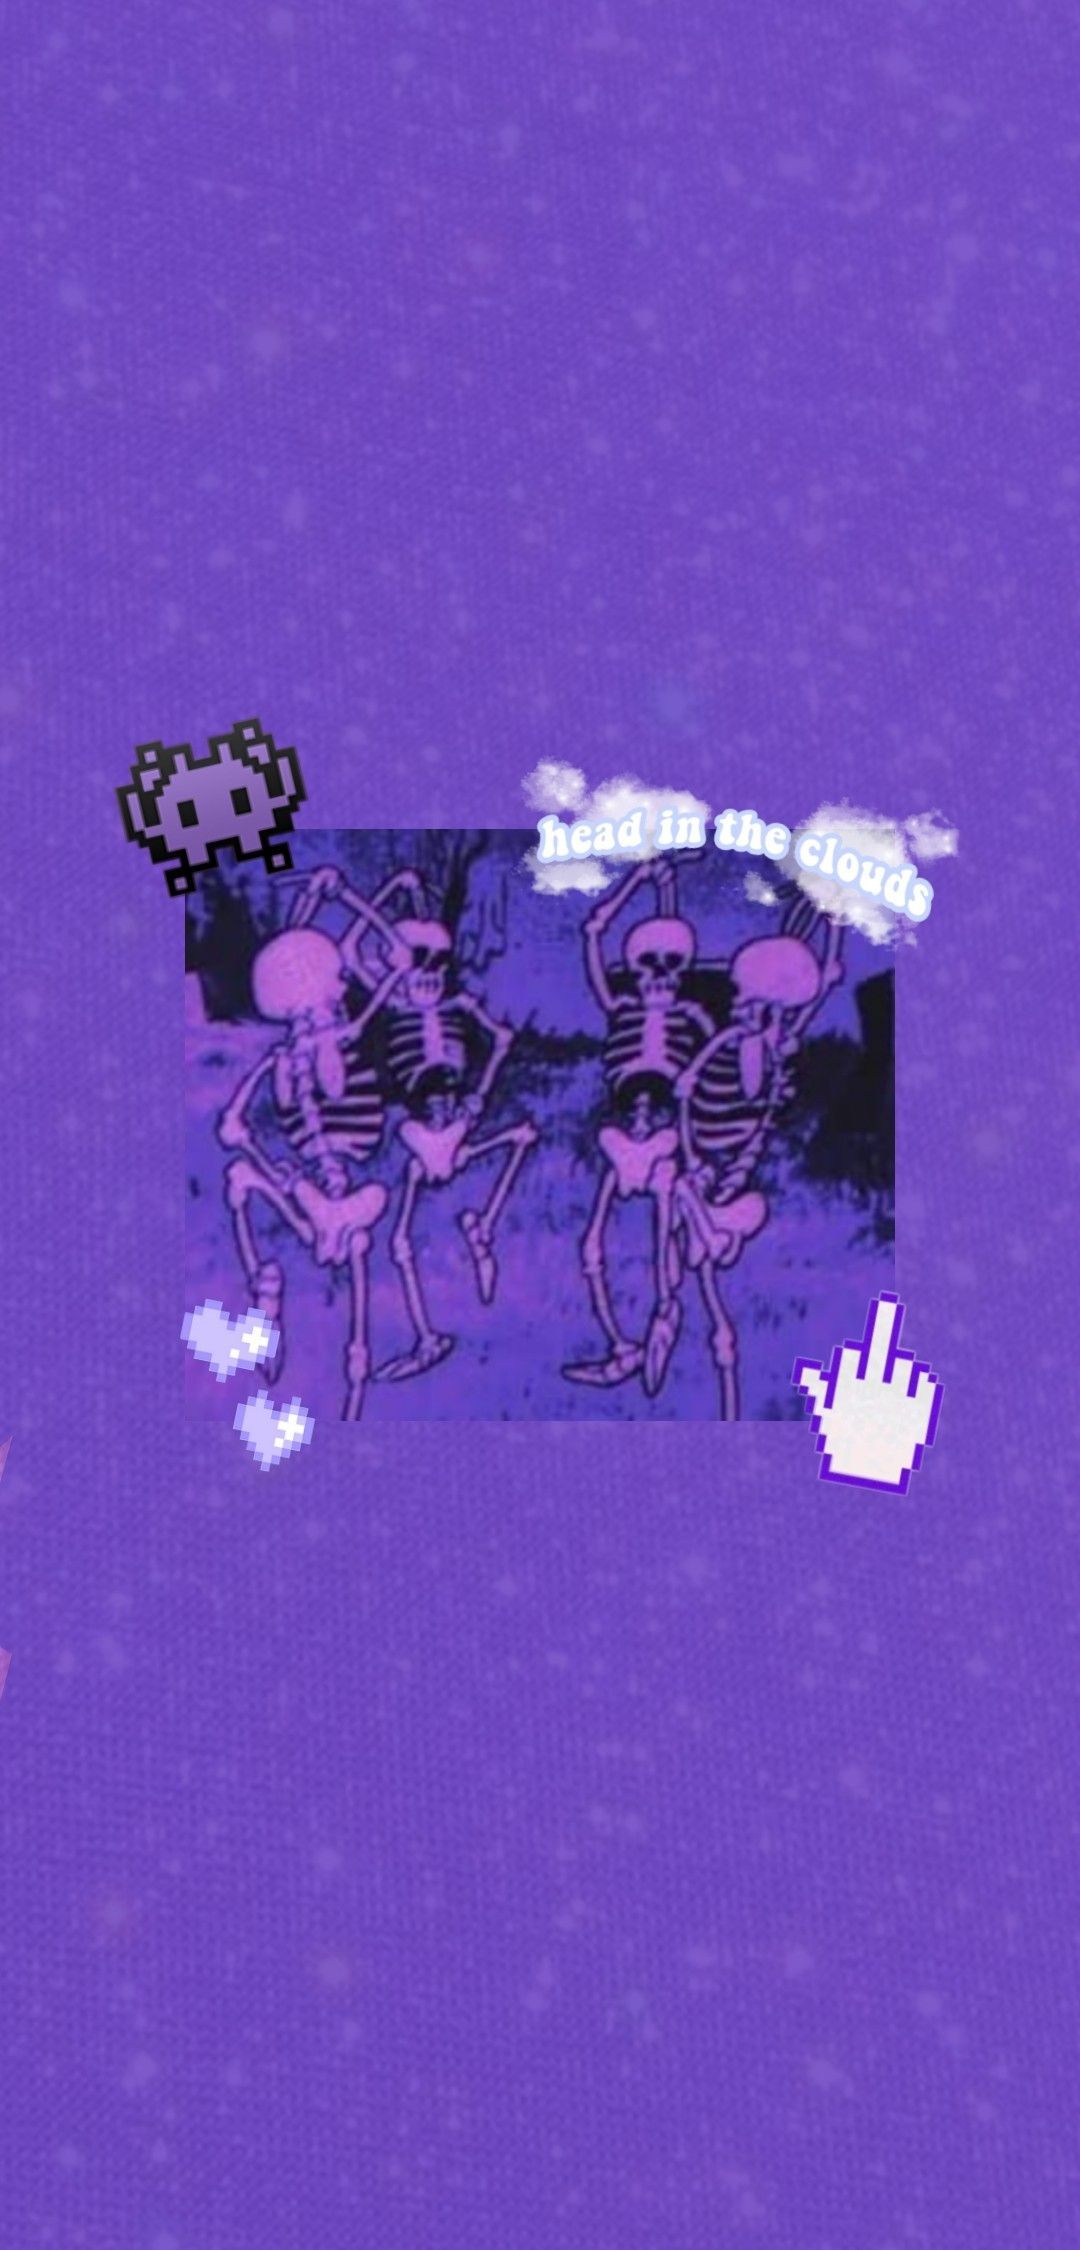 Aesthetic purple background with skeletons and a hand cursor - Indie, dark purple, Y2K